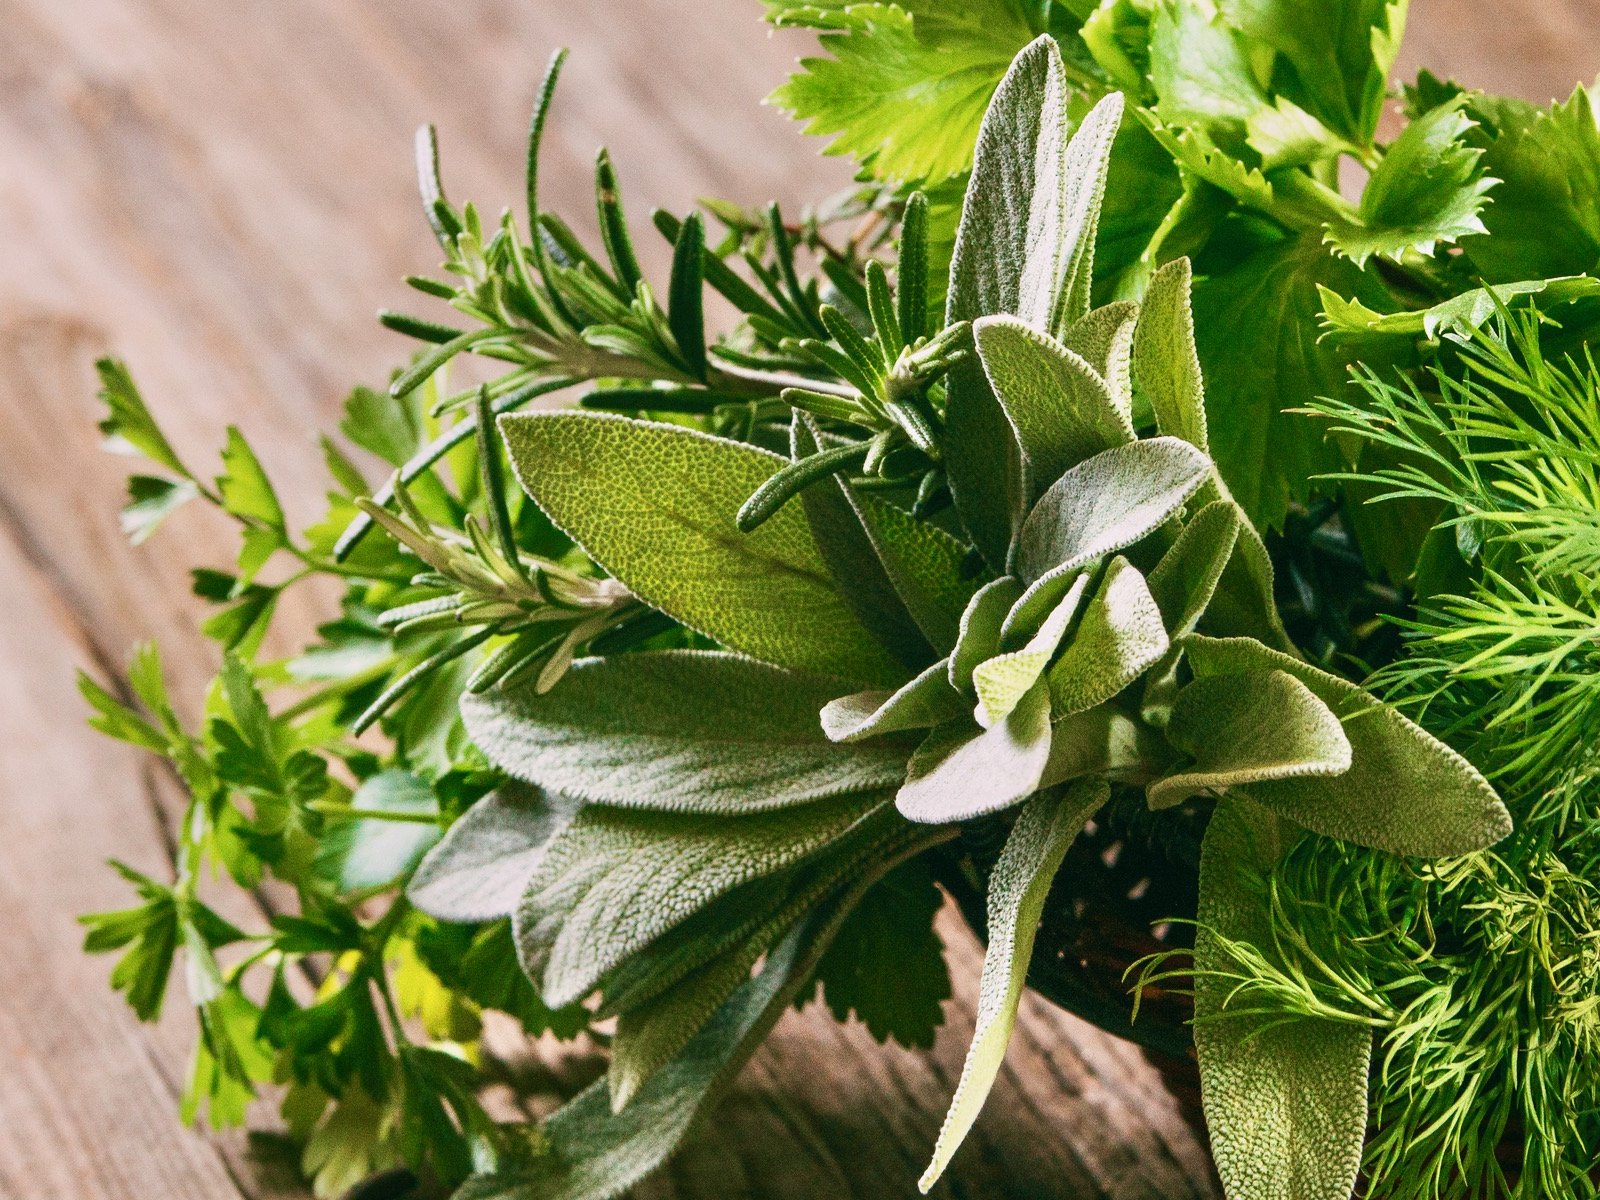 New uses for neglected herbs